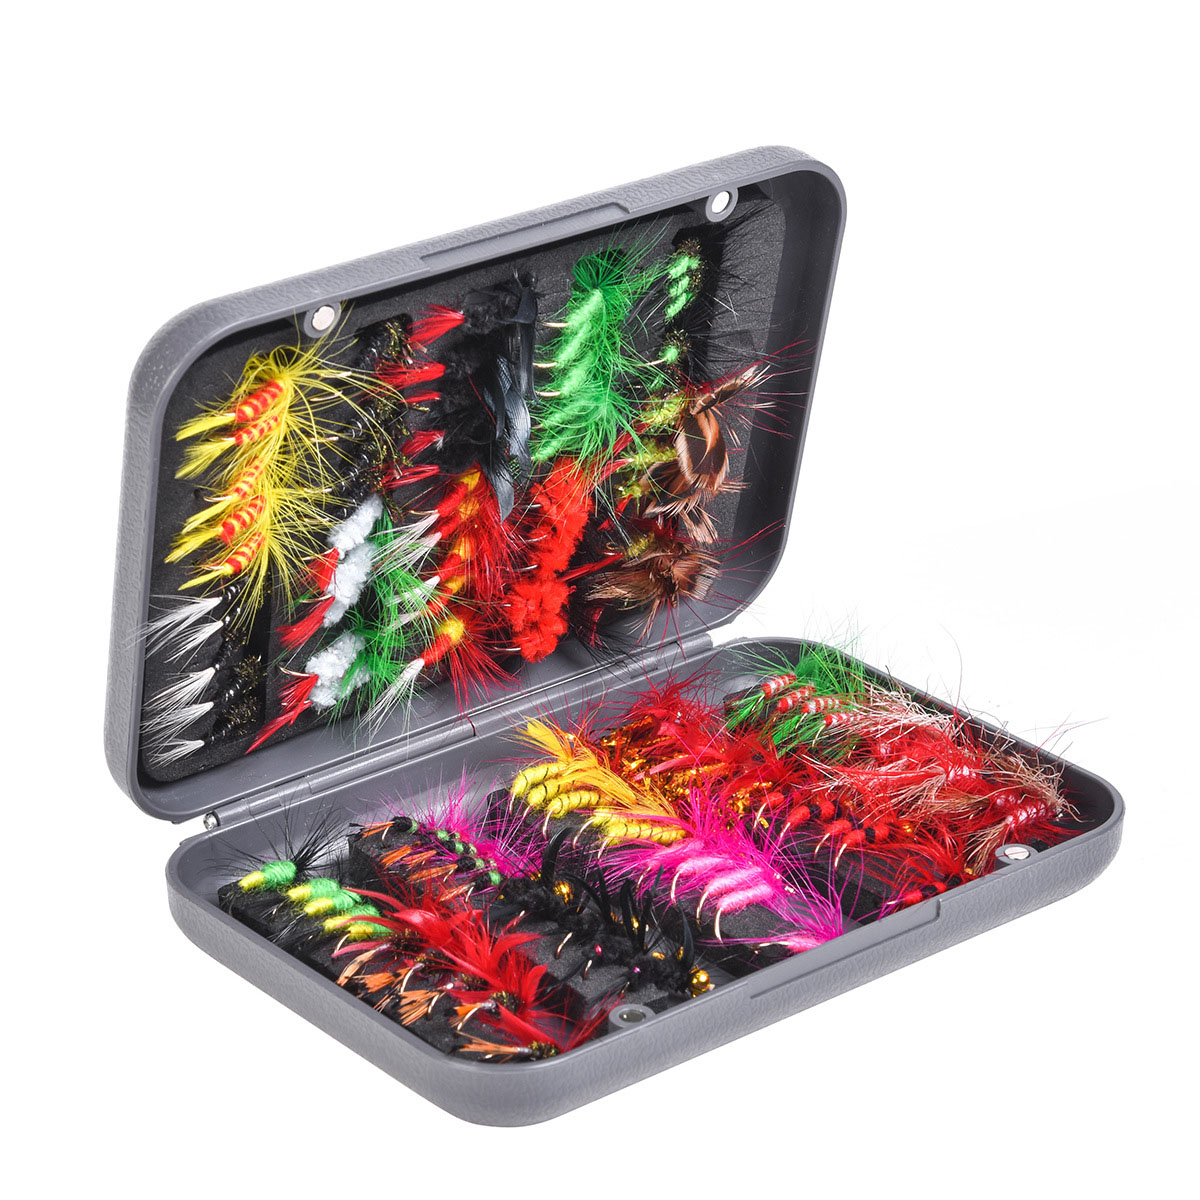 27955 Fly Fishing Lure Kit Multi-color Mixed Flies Hook Fly Fishing Bionic Butterfly Fish Hook Bait Fishing Accessory